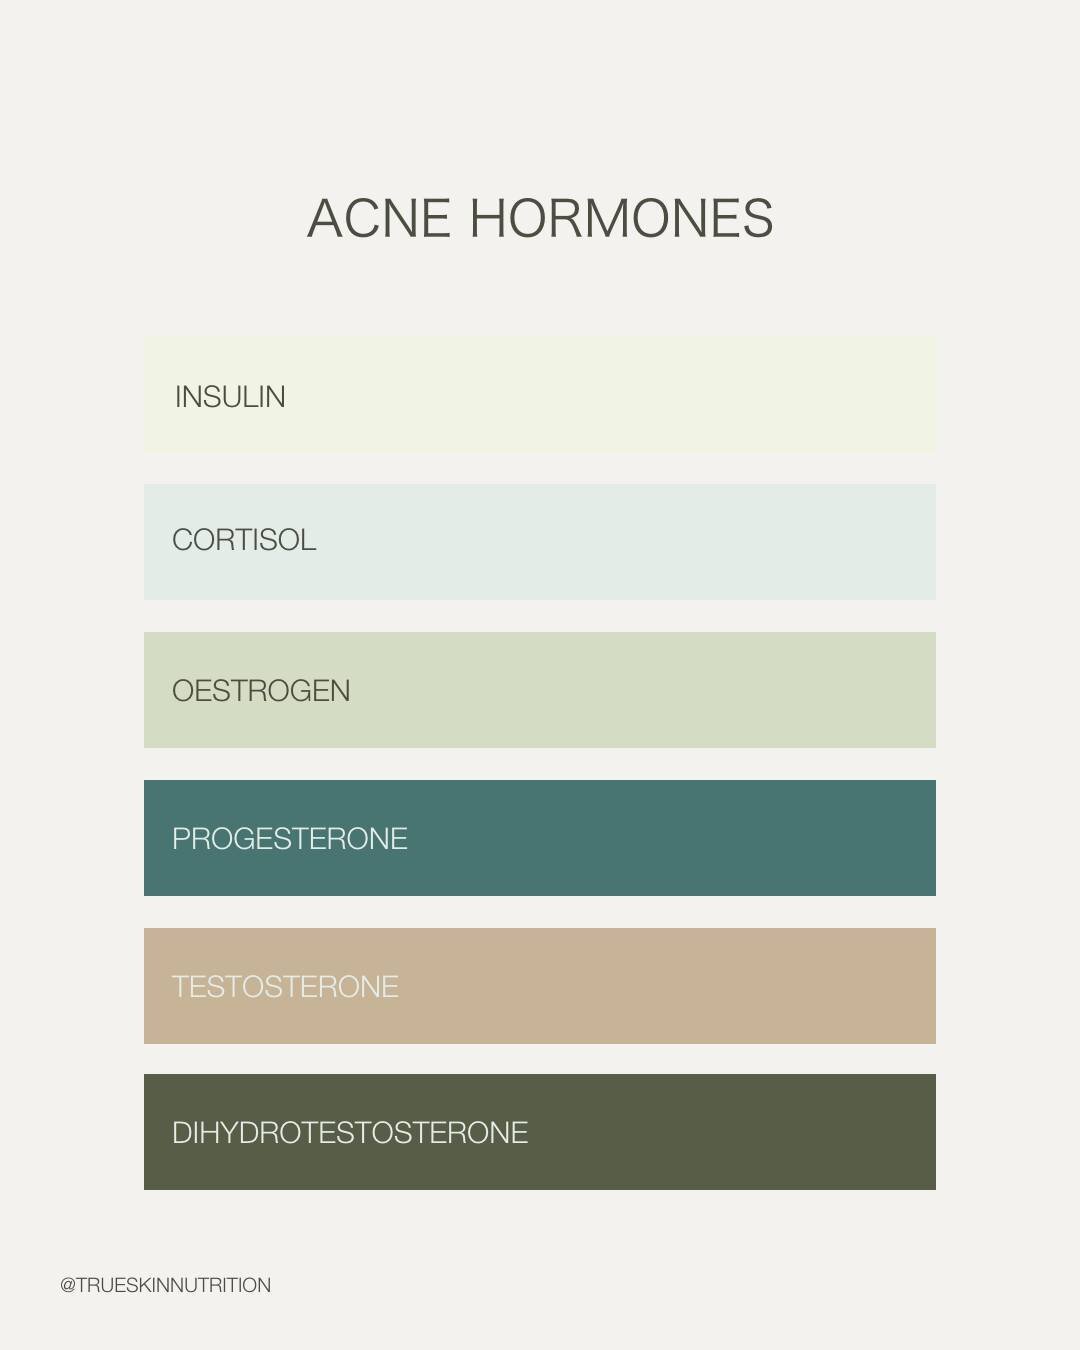 our poor old sex hormones always seem to get a lot of the blame when it comes to acne. ⁠
⁠
But I'm going to let you in on a little secret....⁠
⁠
You've got to think about more than just sex hormones when you are treating hormonal acne, or any acne fo